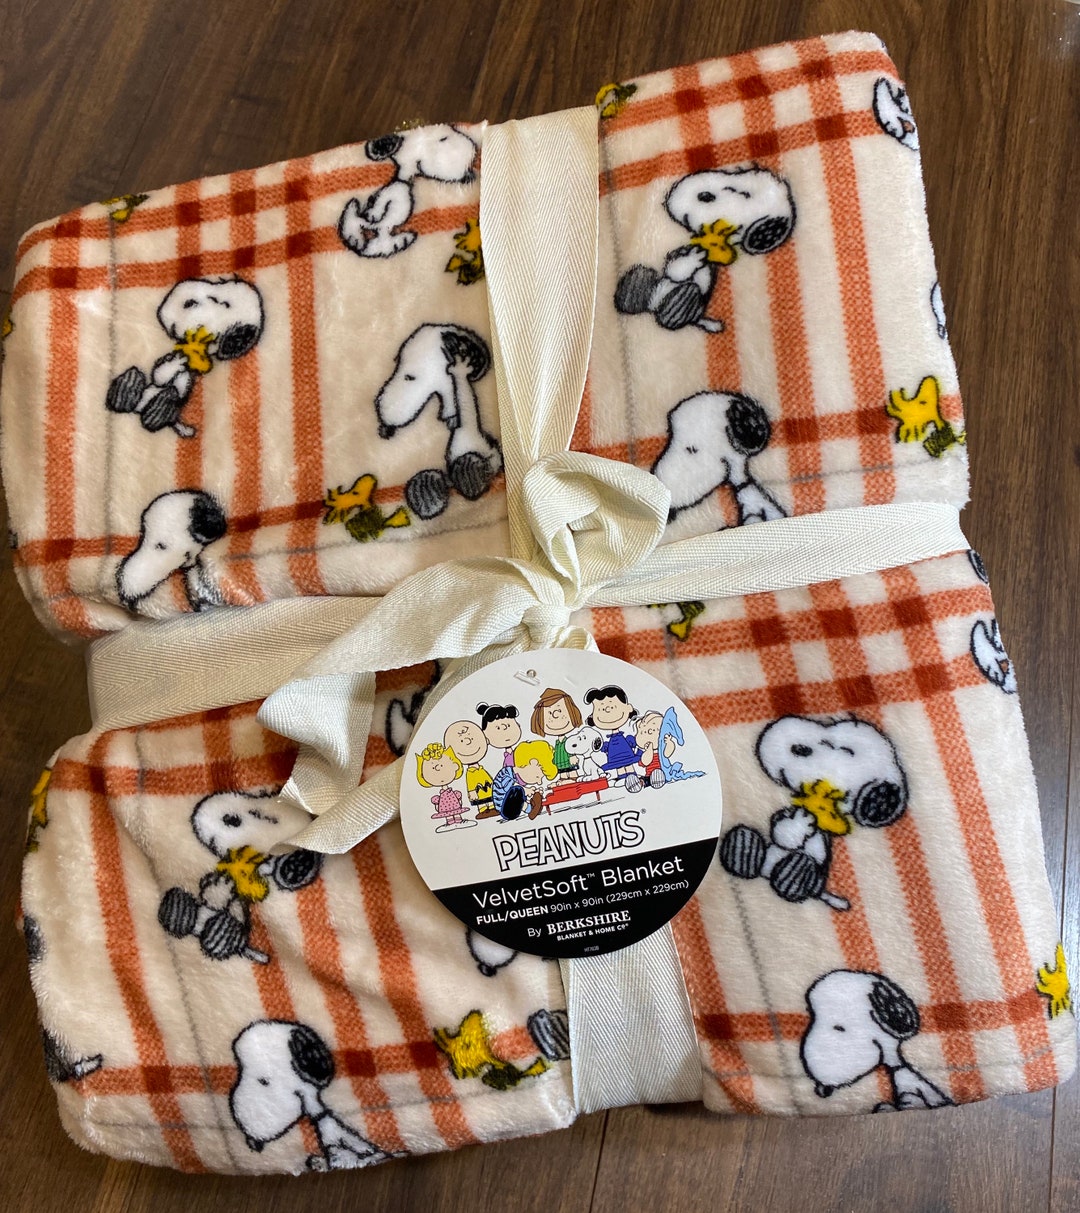 Peanuts Snoopy and Woodstock Plaid Blanket Full-queen-king - Etsy